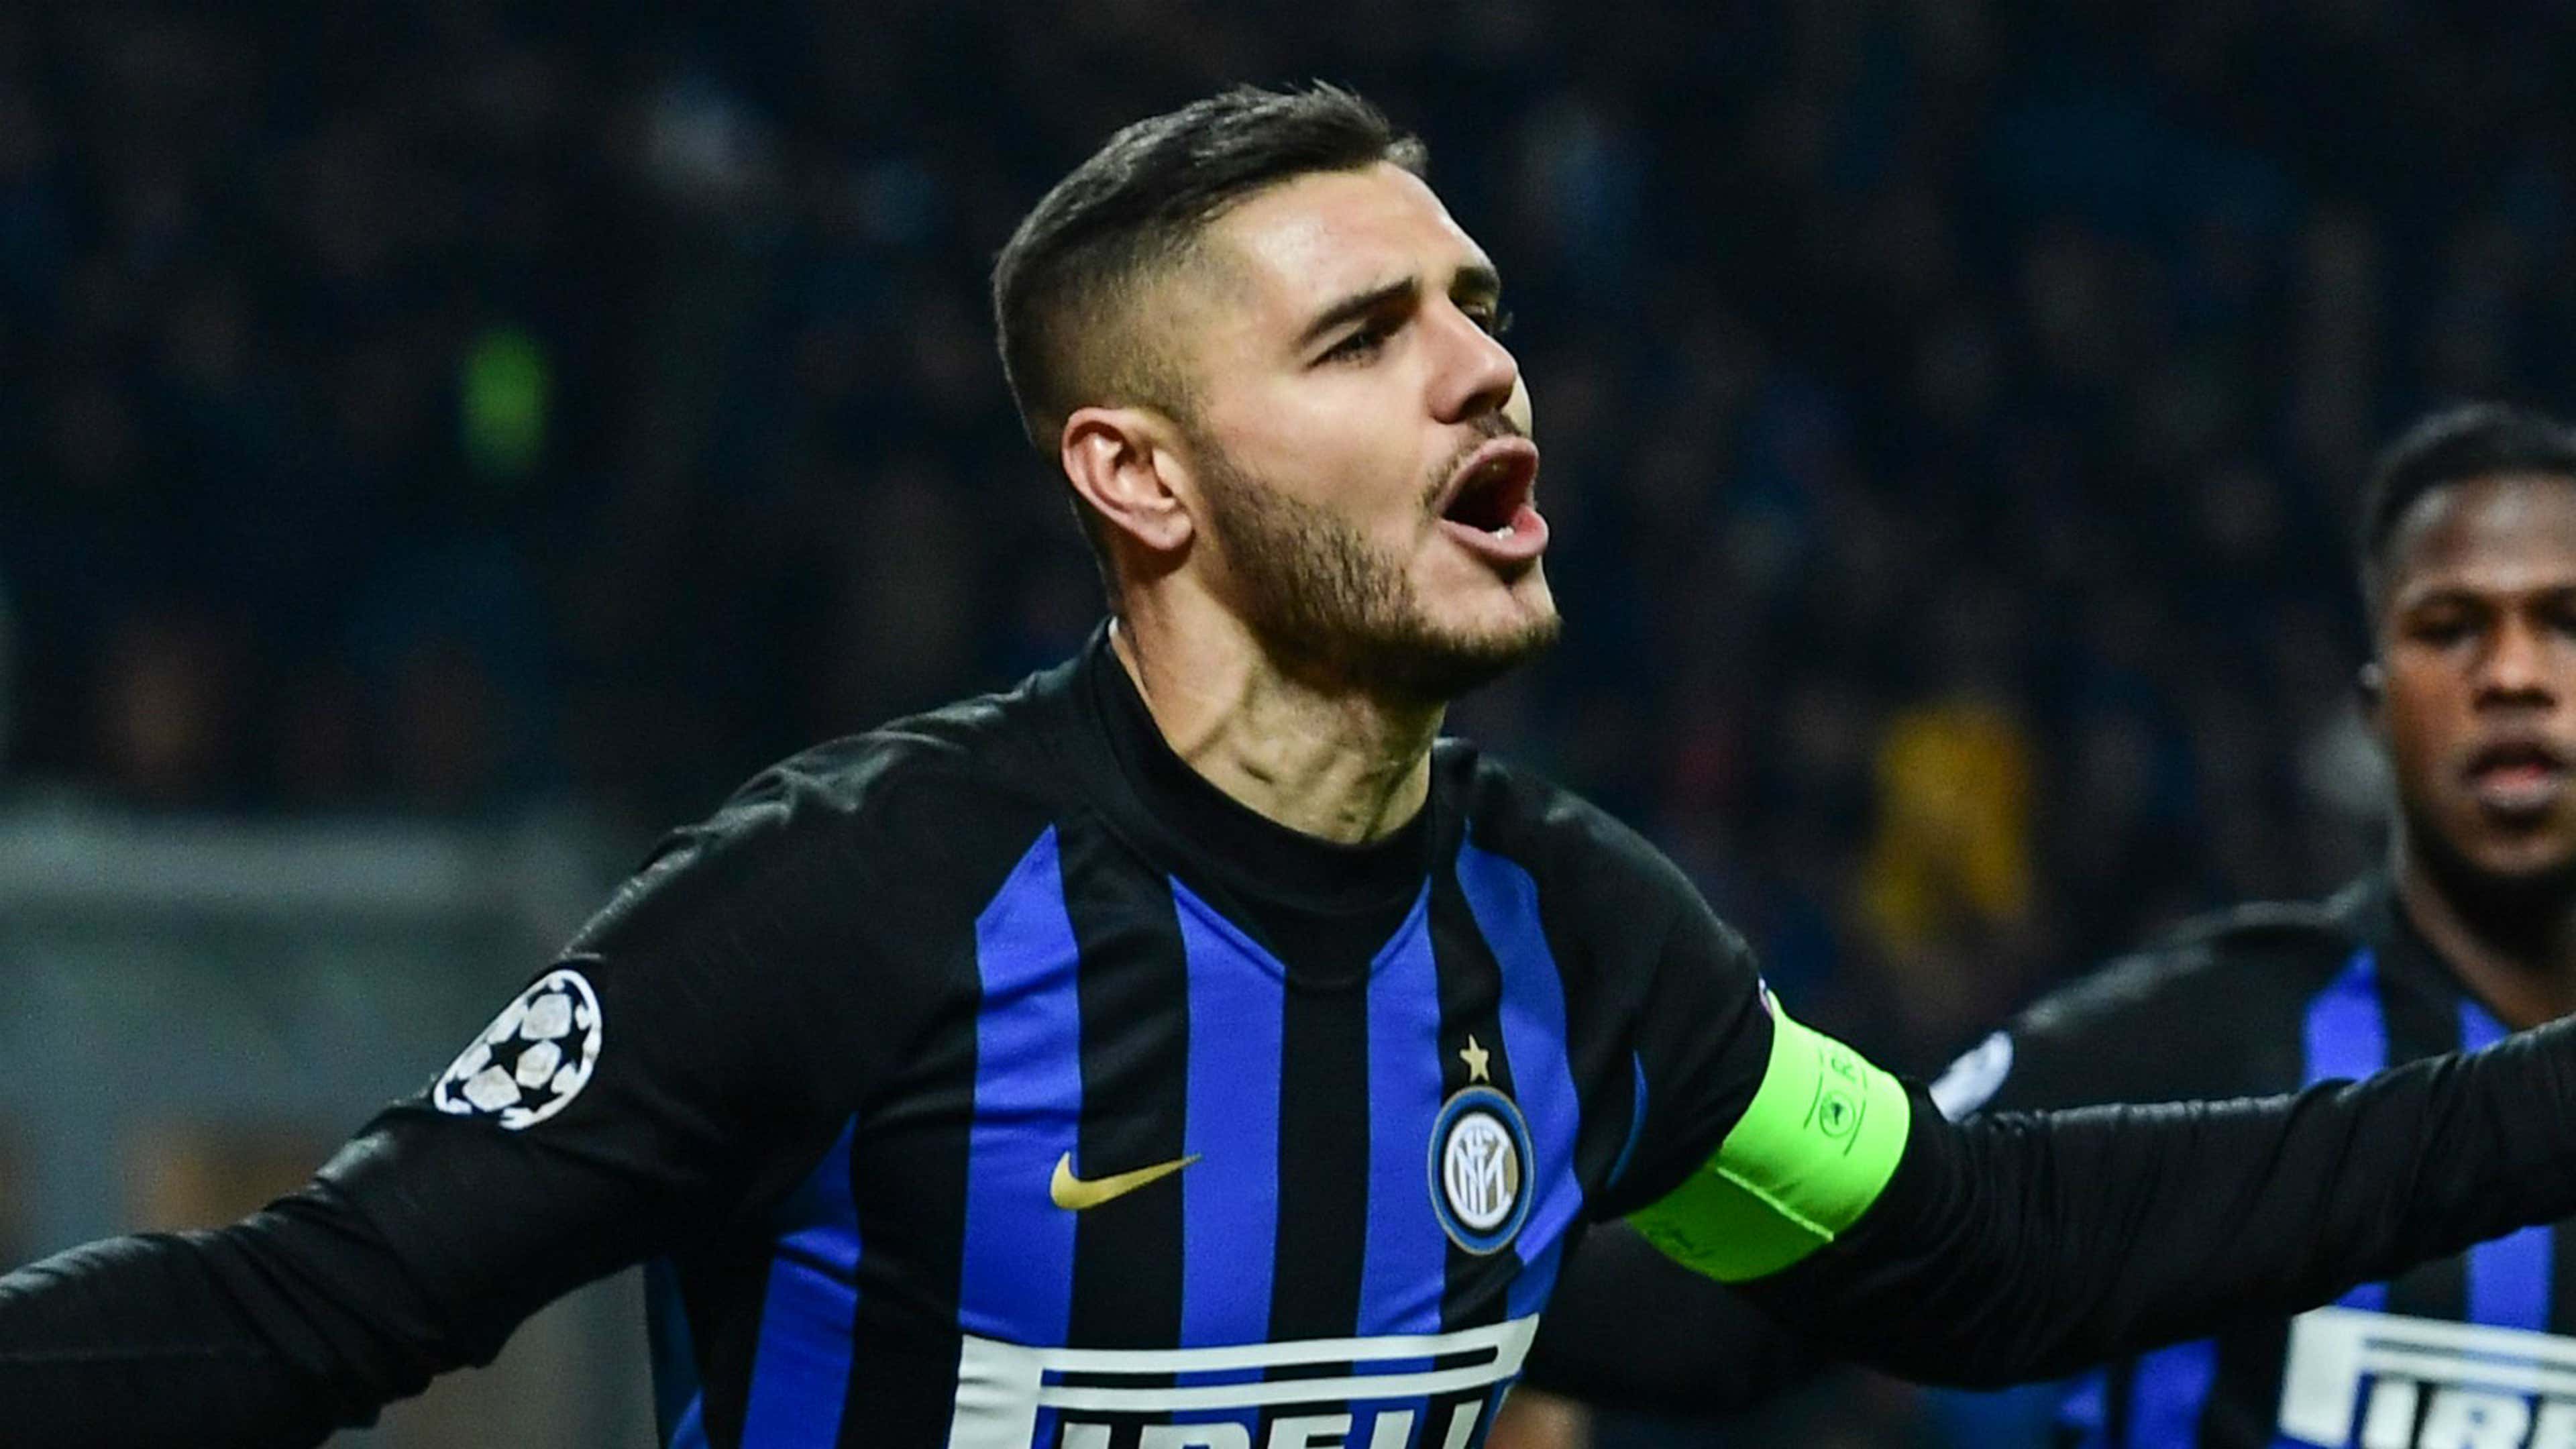 Inter transfer news: Icardi close to signing new deal